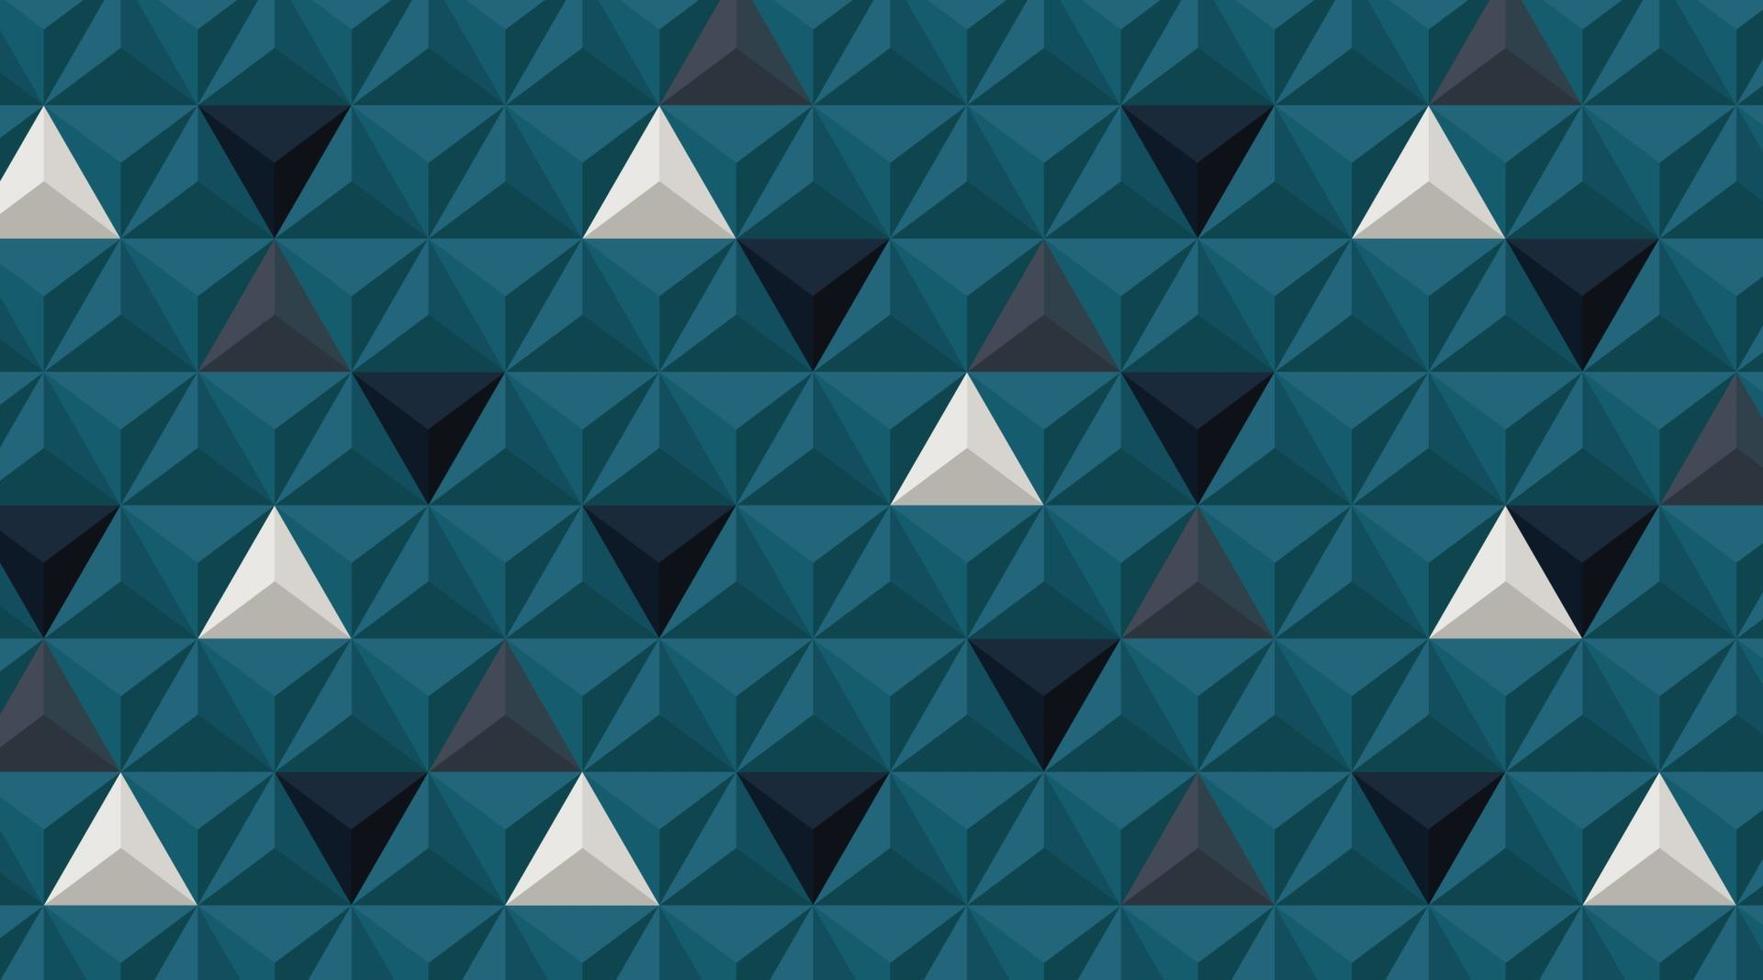 Wall background. Realistic 3d triangle shape design. Vector illustration